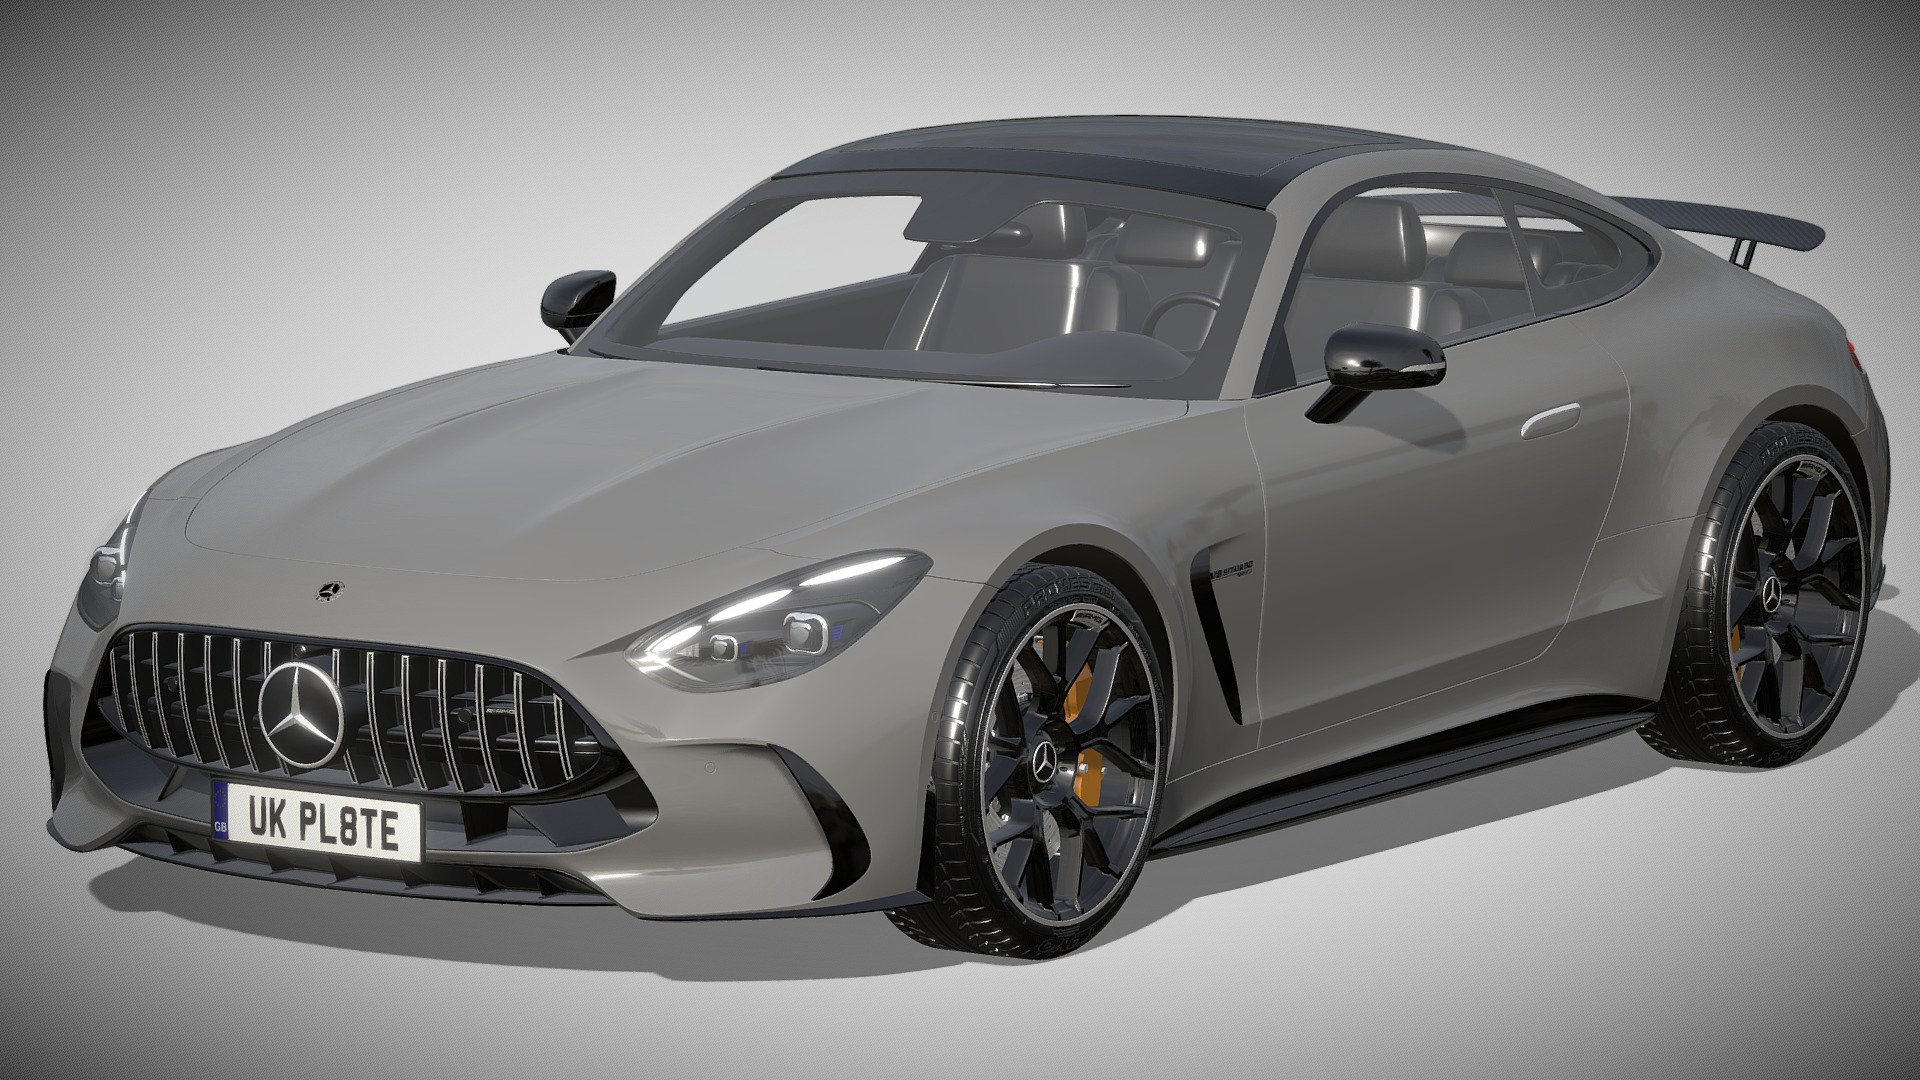 Mercedes-Benz AMG GT Coupe 2024

https://www.mercedes-benz.de/passengercars/models/coupe/new/amg-gt.html

Clean geometry Light weight model, yet completely detailed for HI-Res renders. Use for movies, Advertisements or games

Corona render and materials

All textures include in *.rar files

Lighting setup is not included in the file! - Mercedes-Benz AMG GT Coupe 2024 - Buy Royalty Free 3D model by zifir3d 3d model